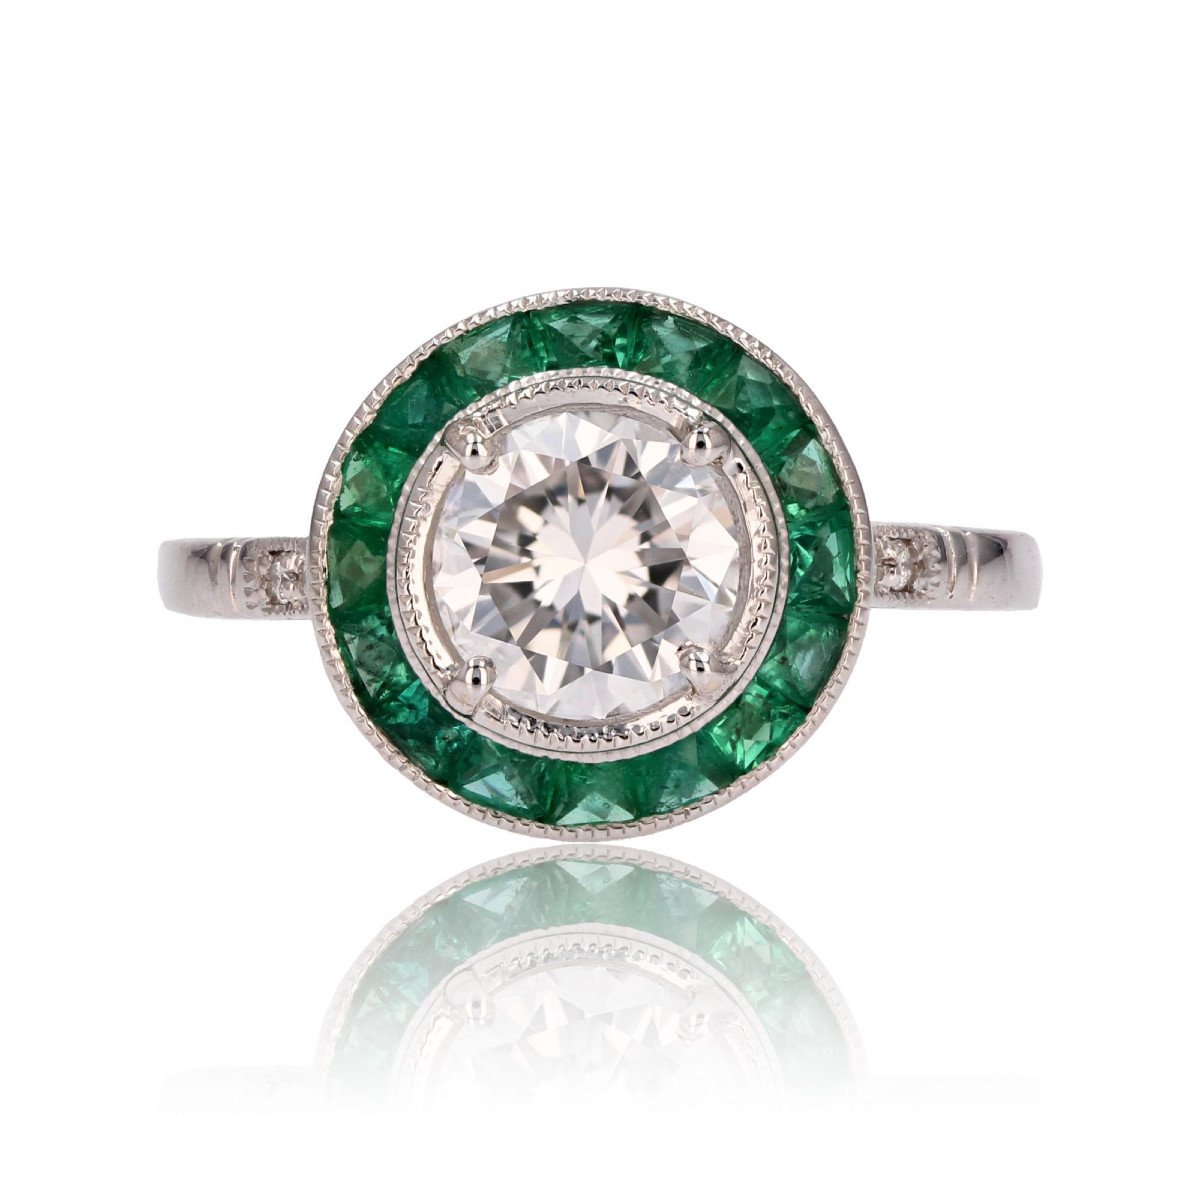 Calibrated Diamonds And Emeralds Ring